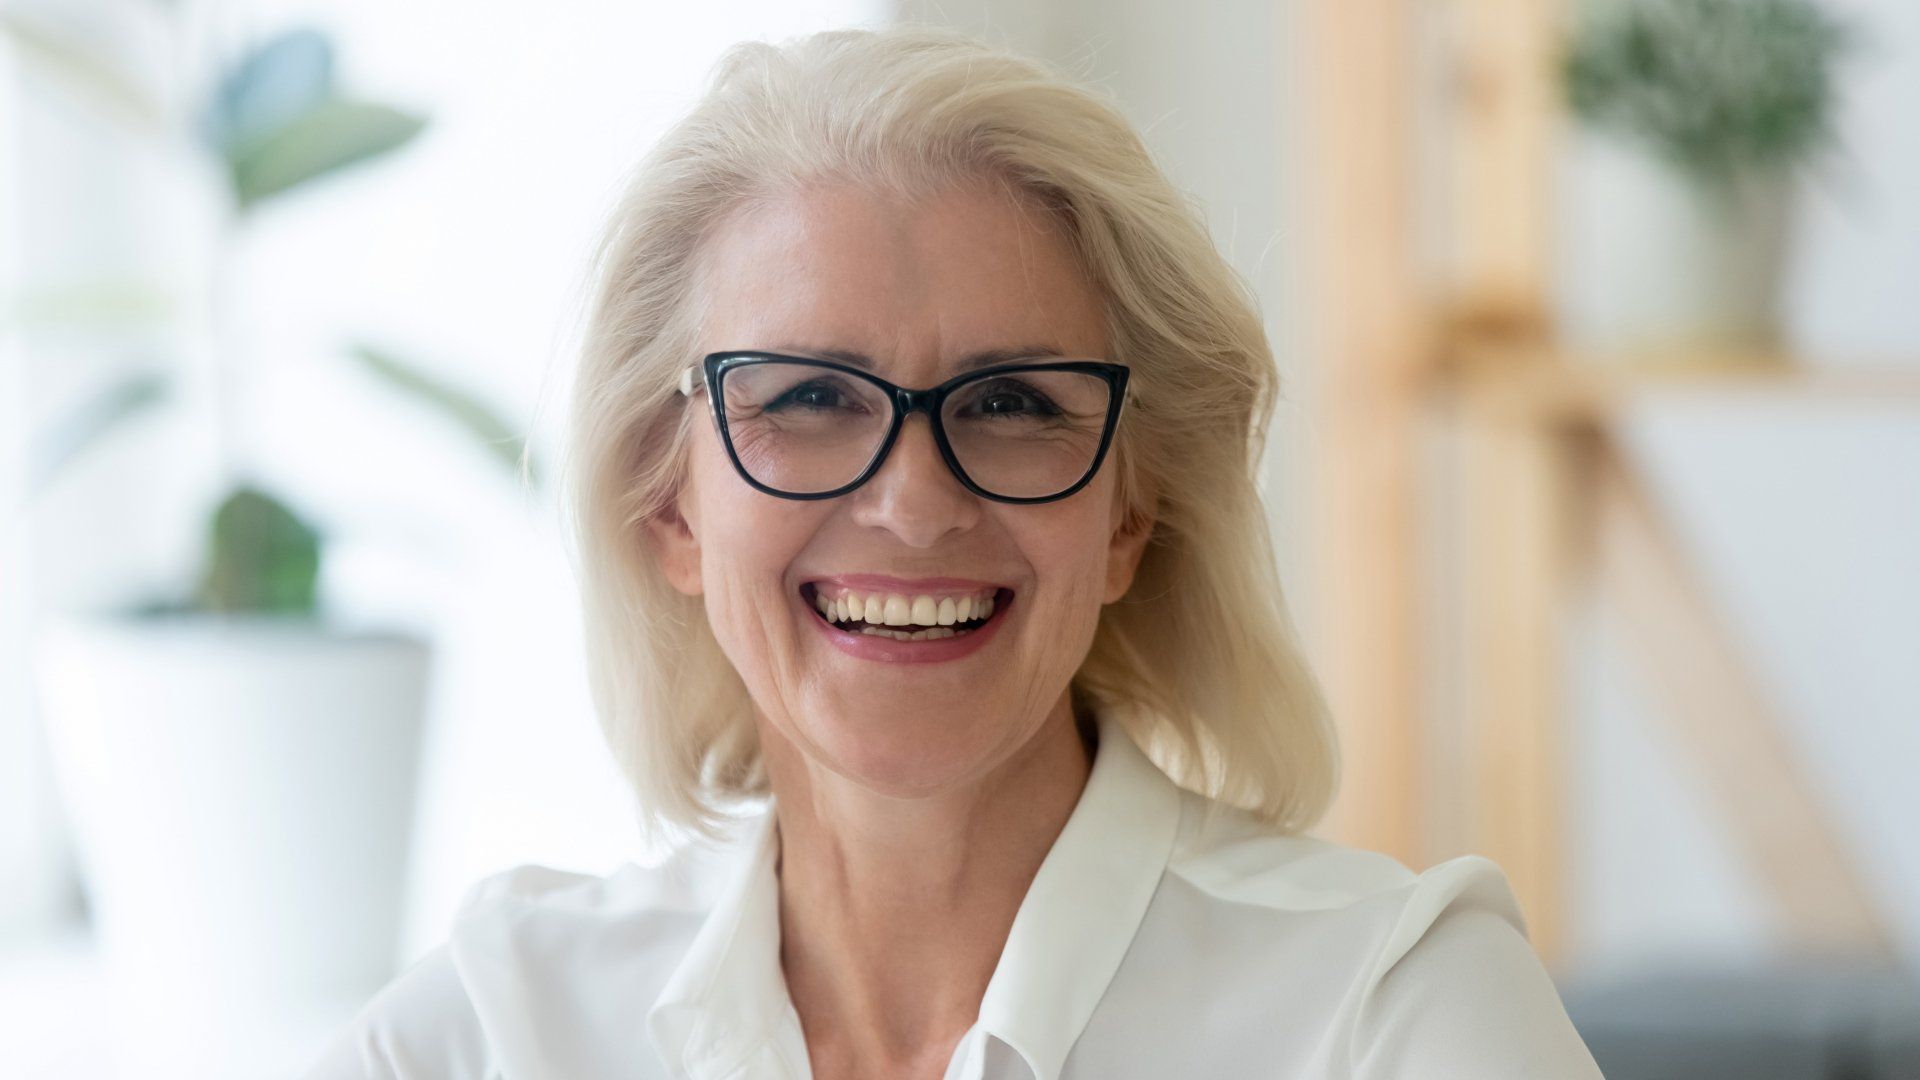 A woman wearing glasses and a white shirt is smiling.